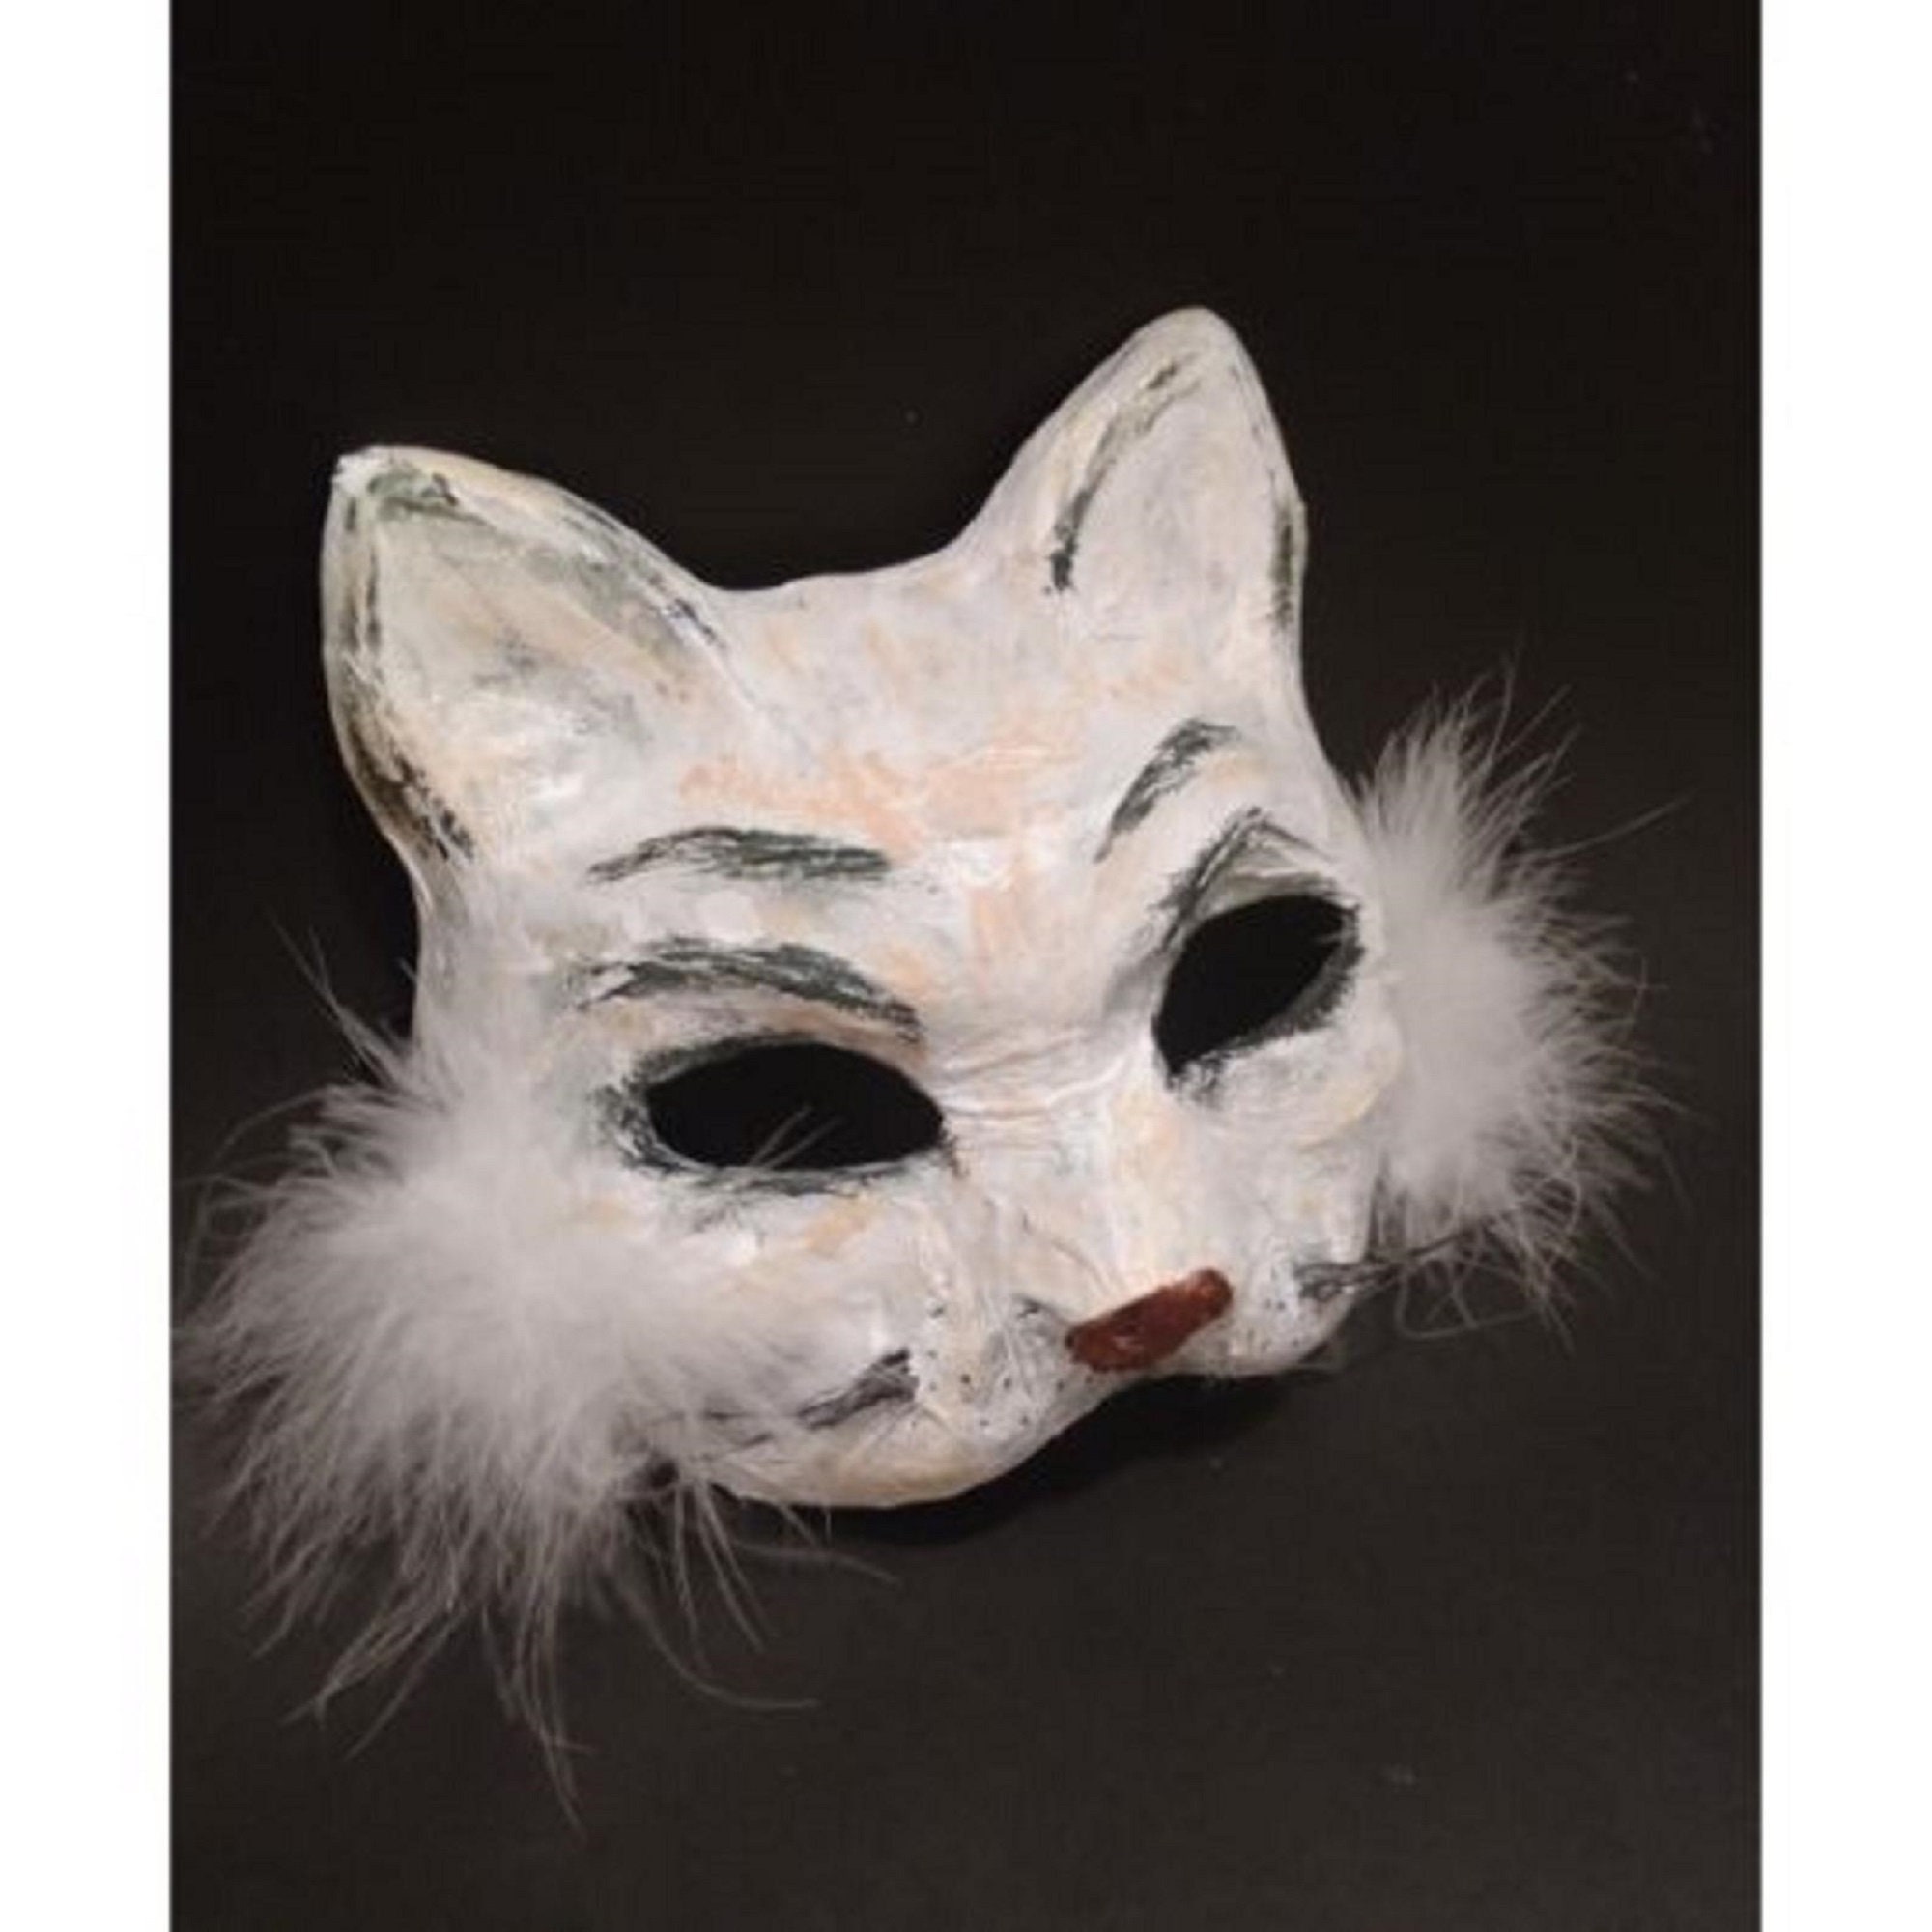 Cat Mask Animal Paper Mache Mask Scary Theatre Mask